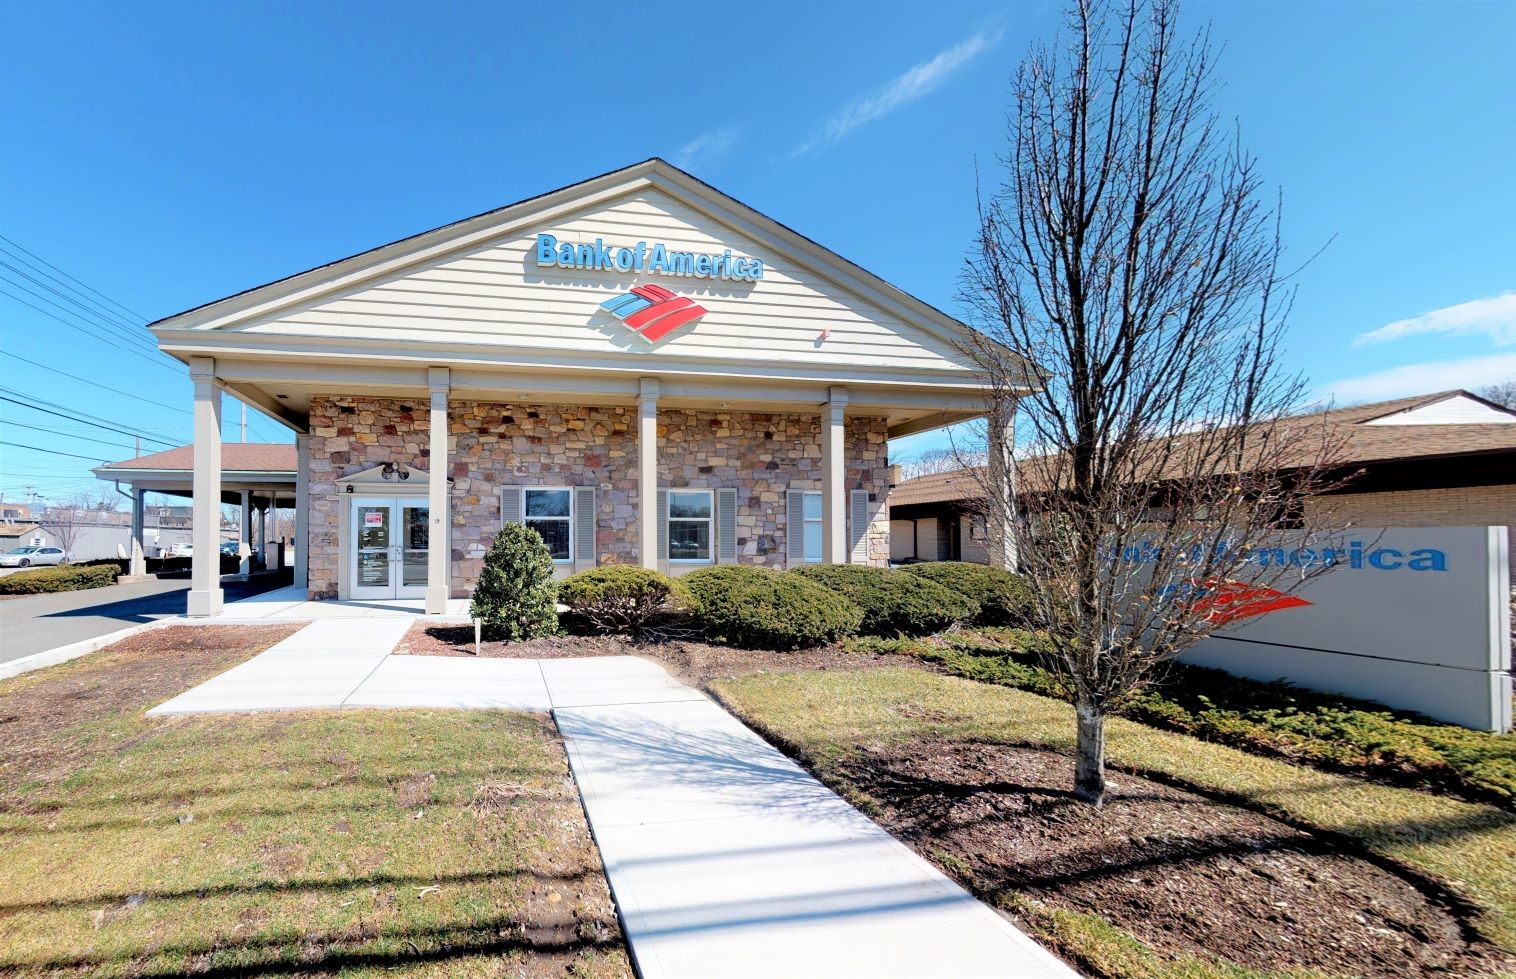 Bank of America financial center with drive-thru ATM | 15 Yawpo Ave, Oakland, NJ 07436